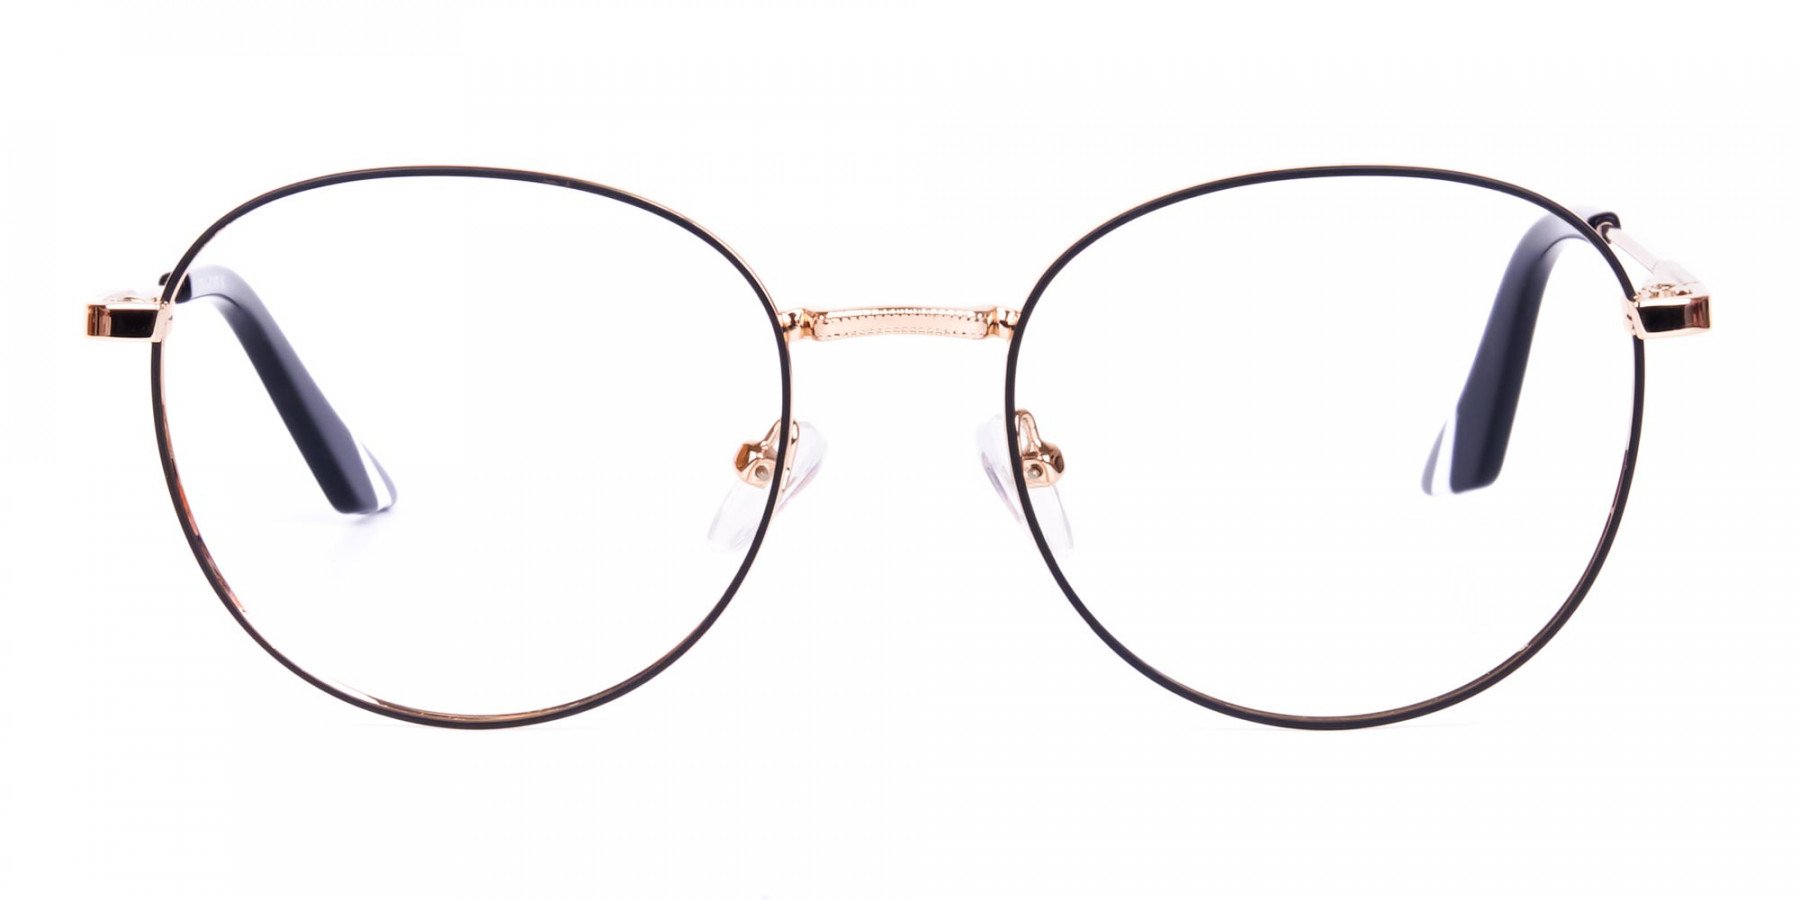 Black-and-Gold-Round-Glasses-1